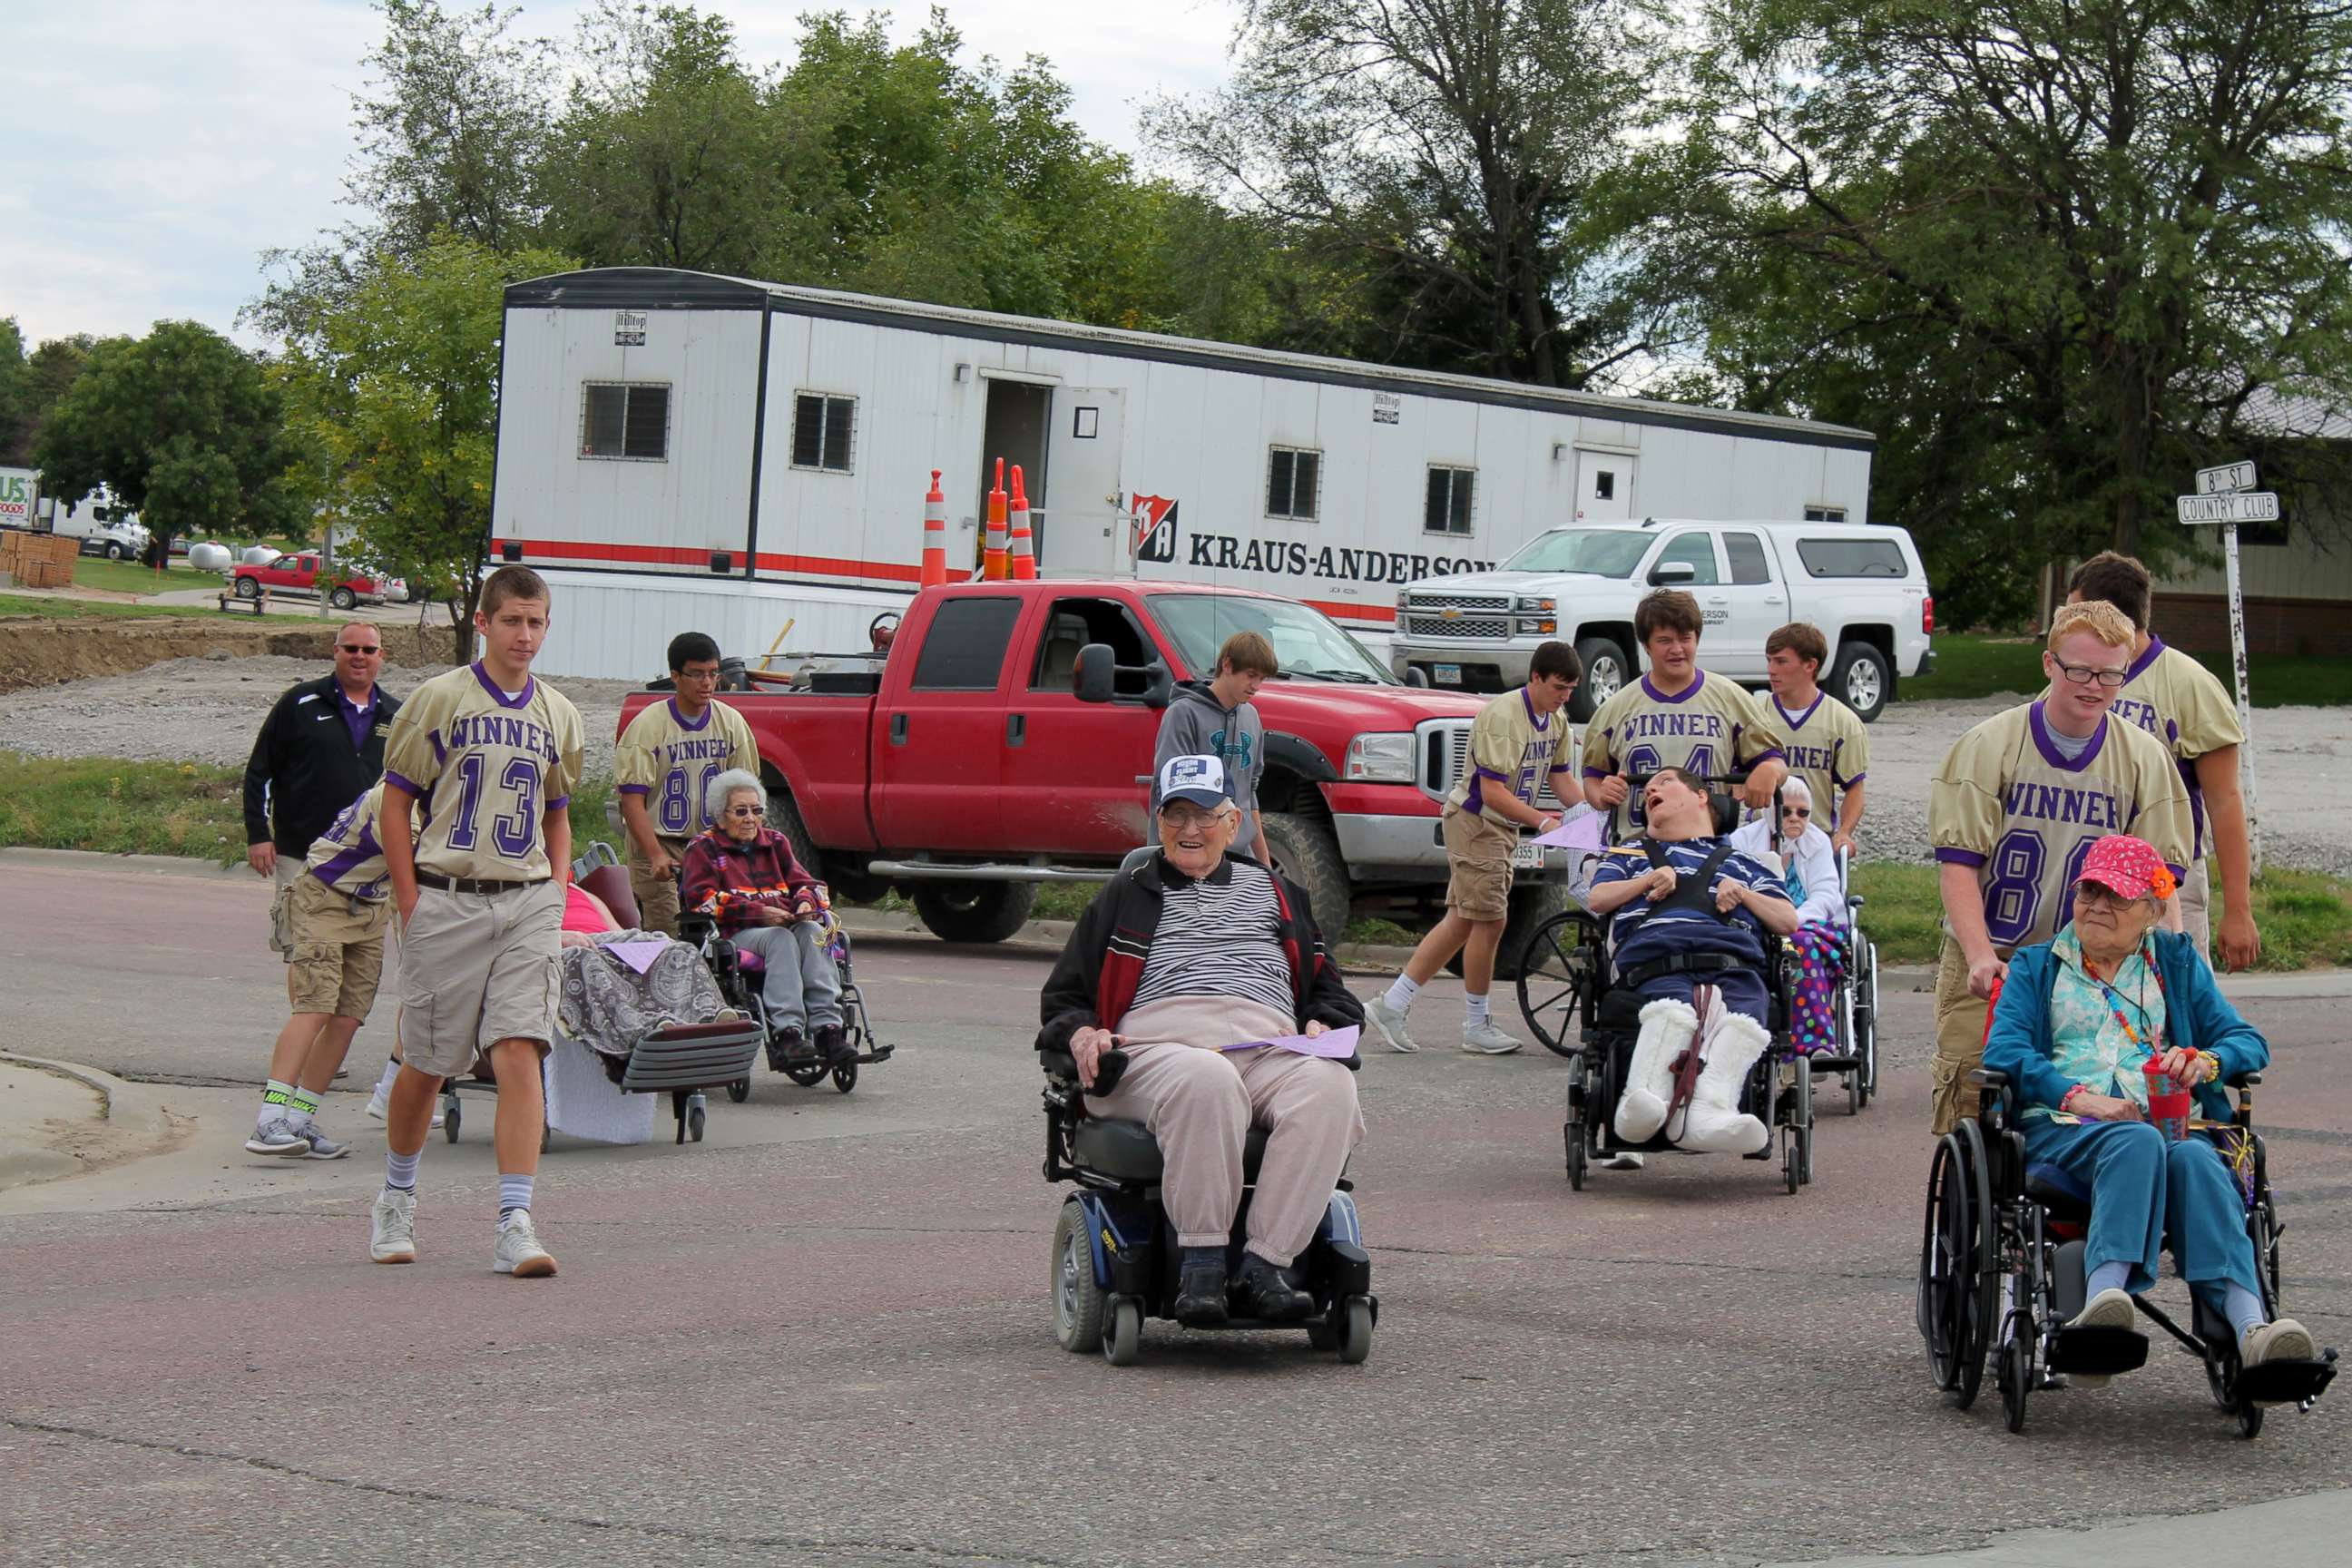 PHOTO: Winner High School football players in South Dakota escorted the residents of Winner Regional Healthcare Center Long-Term Care to their homecoming parade route for them to enjoy the festivities.